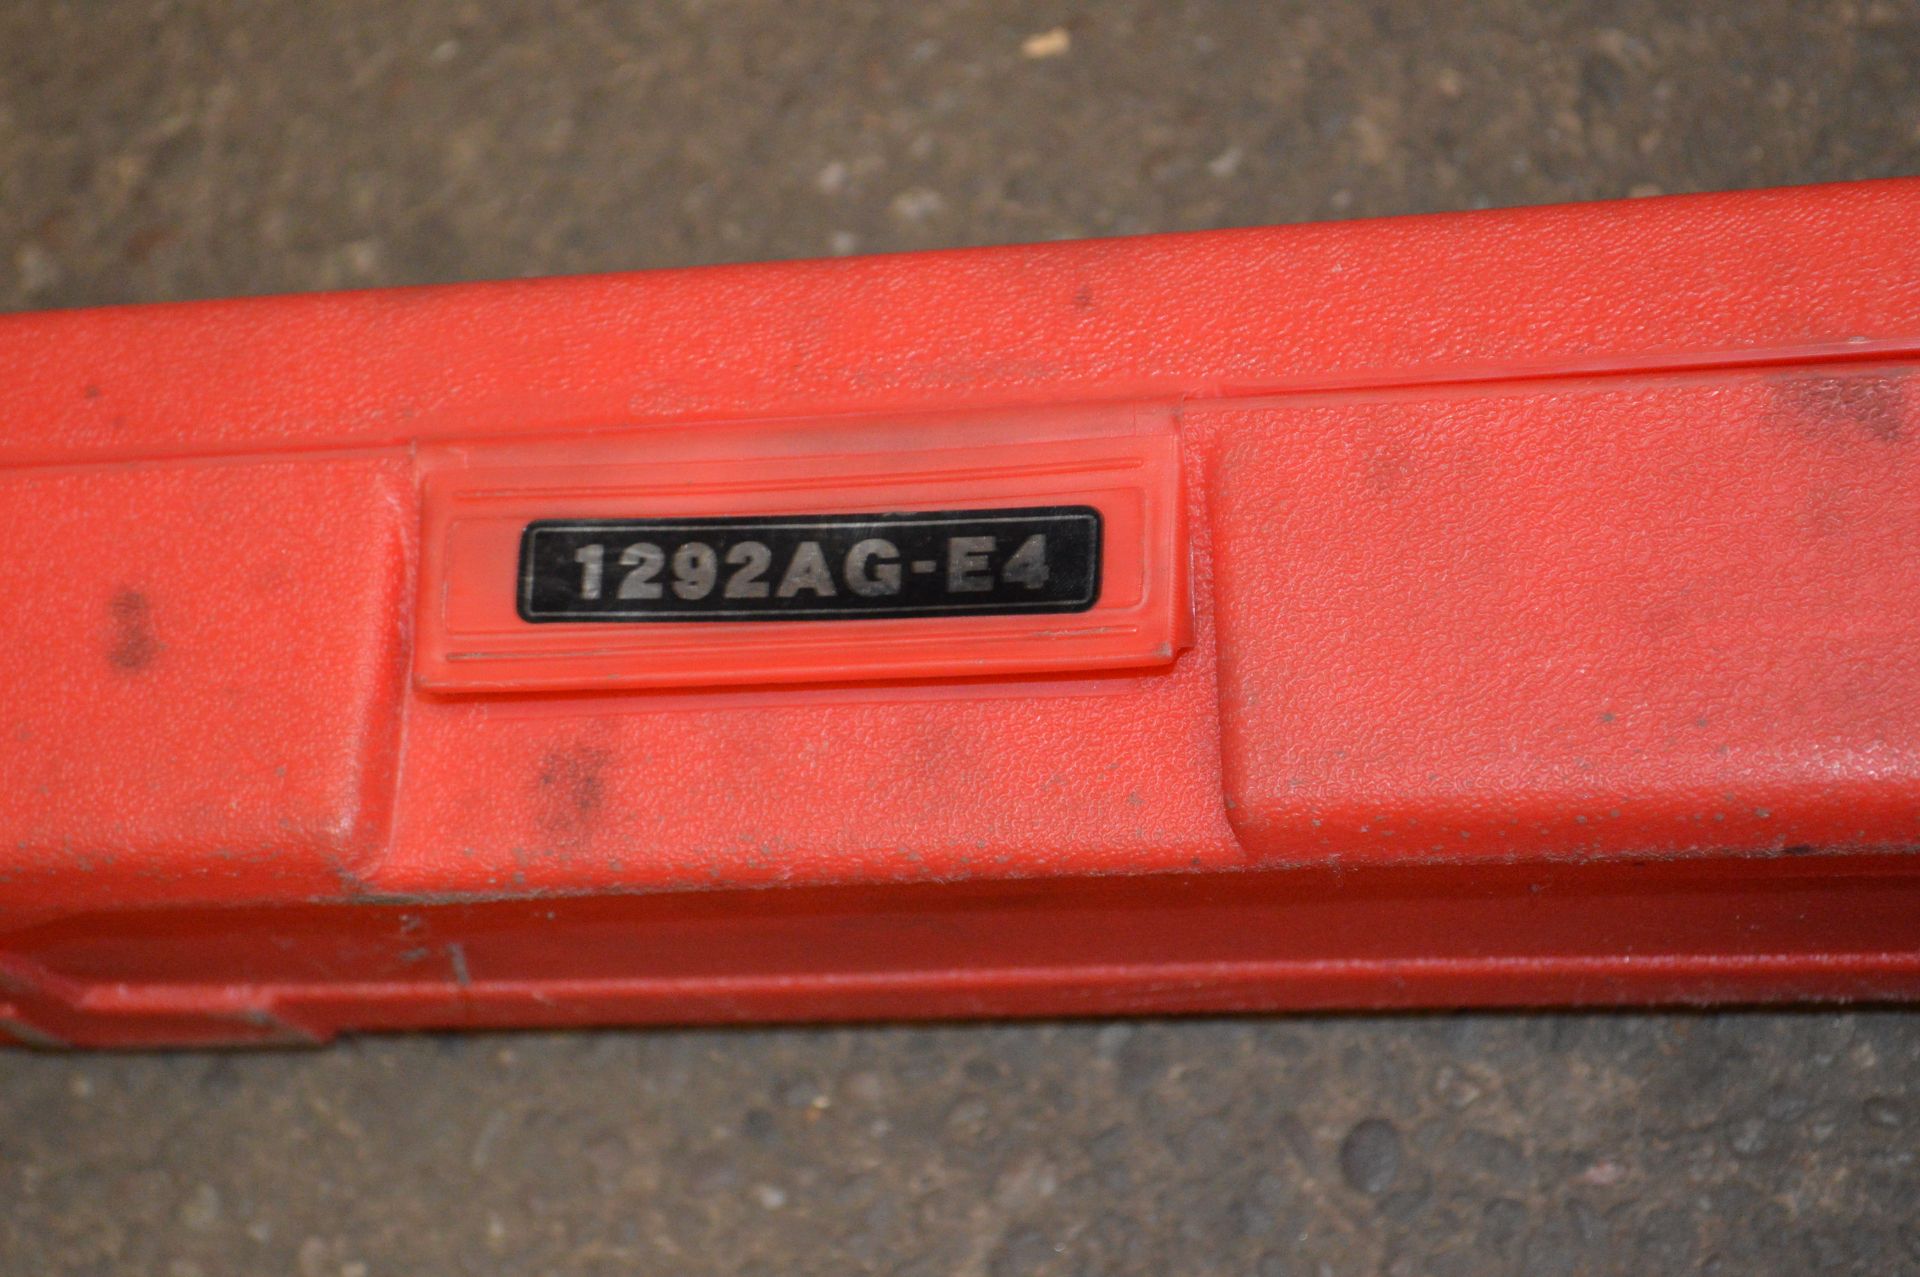 Tengtool Torque Wrench Model No: 1292AG E4 with Case - Image 6 of 7